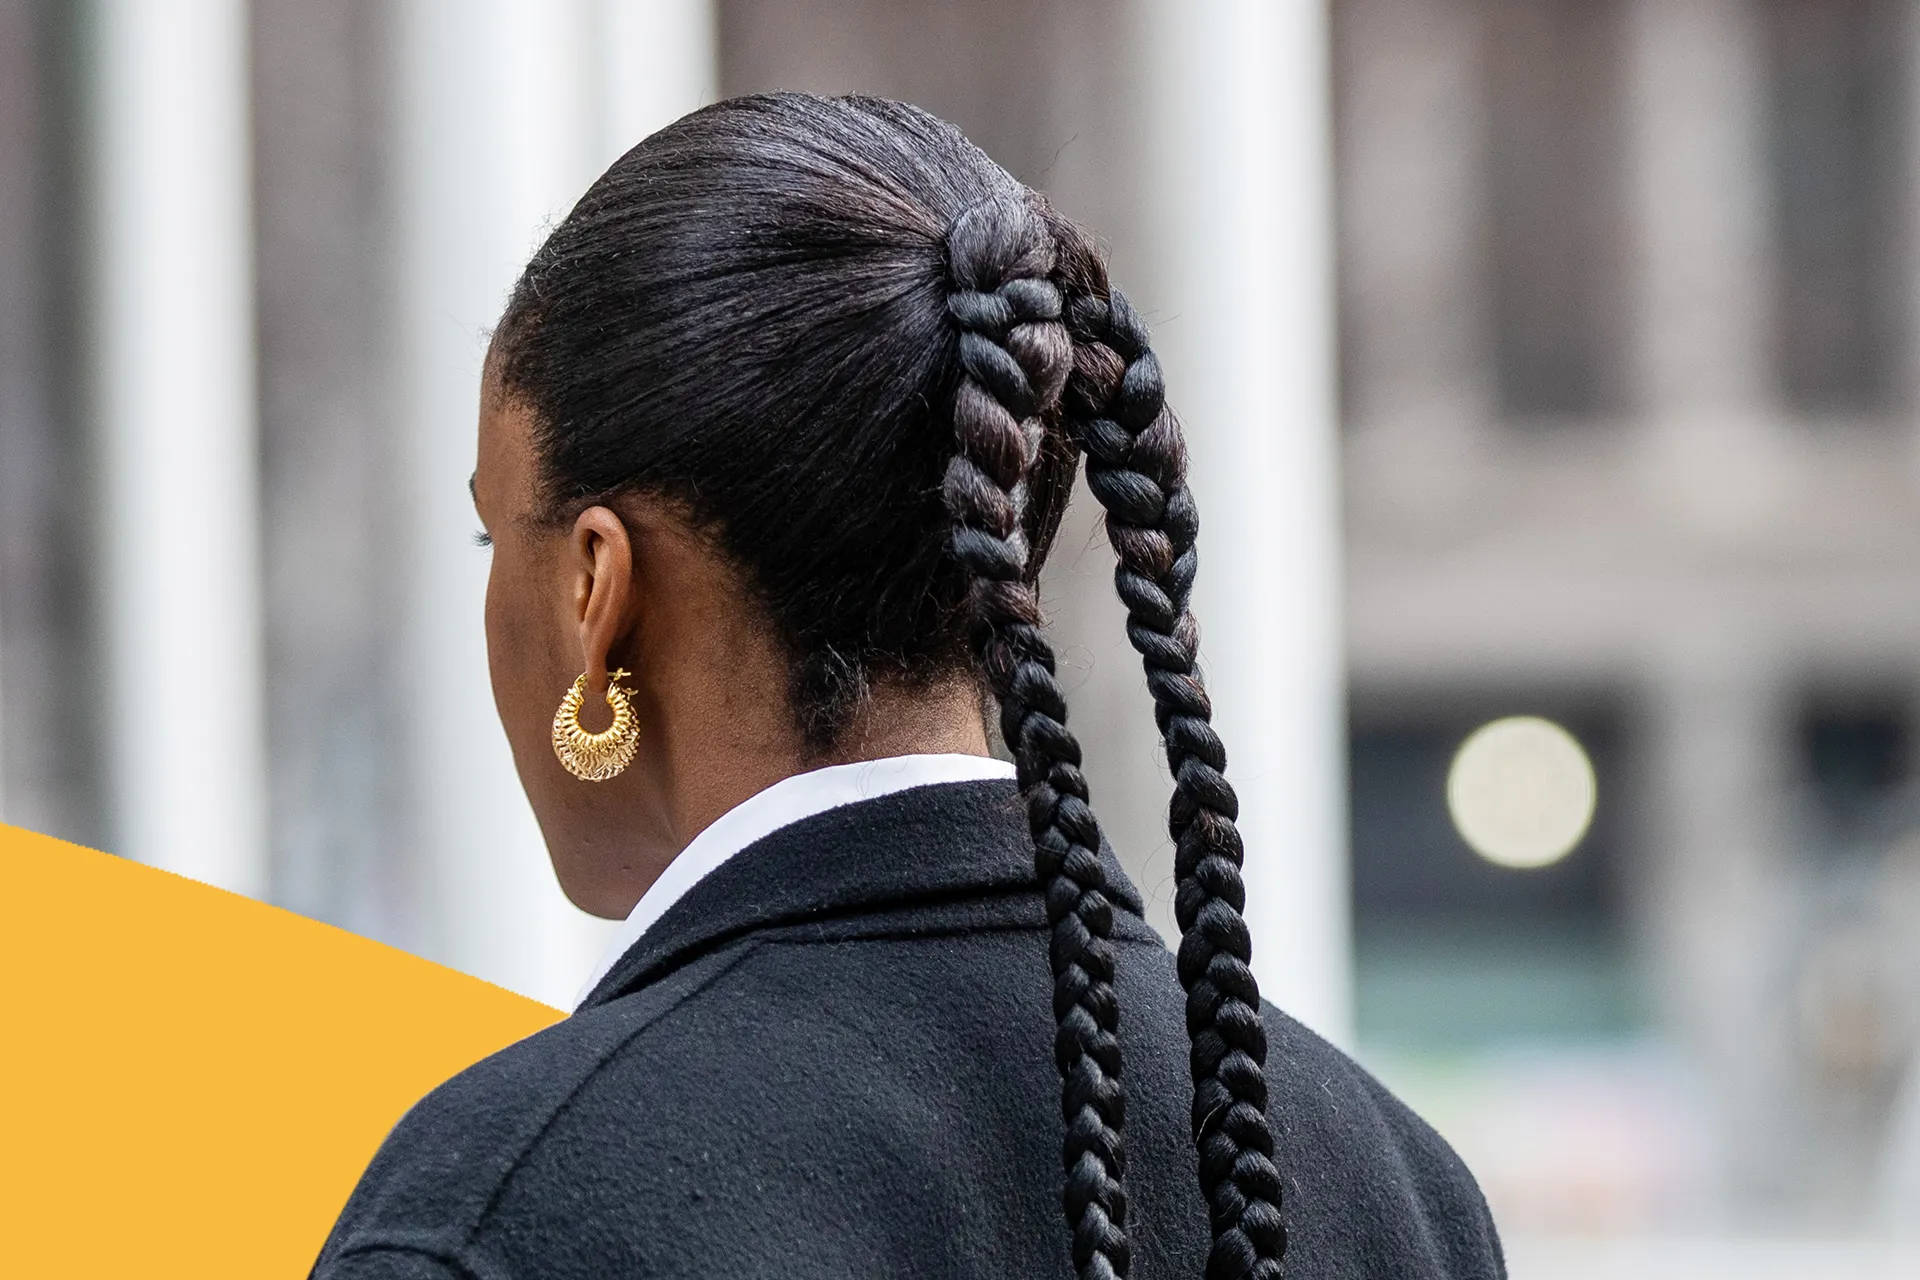 Woman Empowerment in Corporate Fashion - Boss Lady in a Suit with Stylish Braids Wallpaper